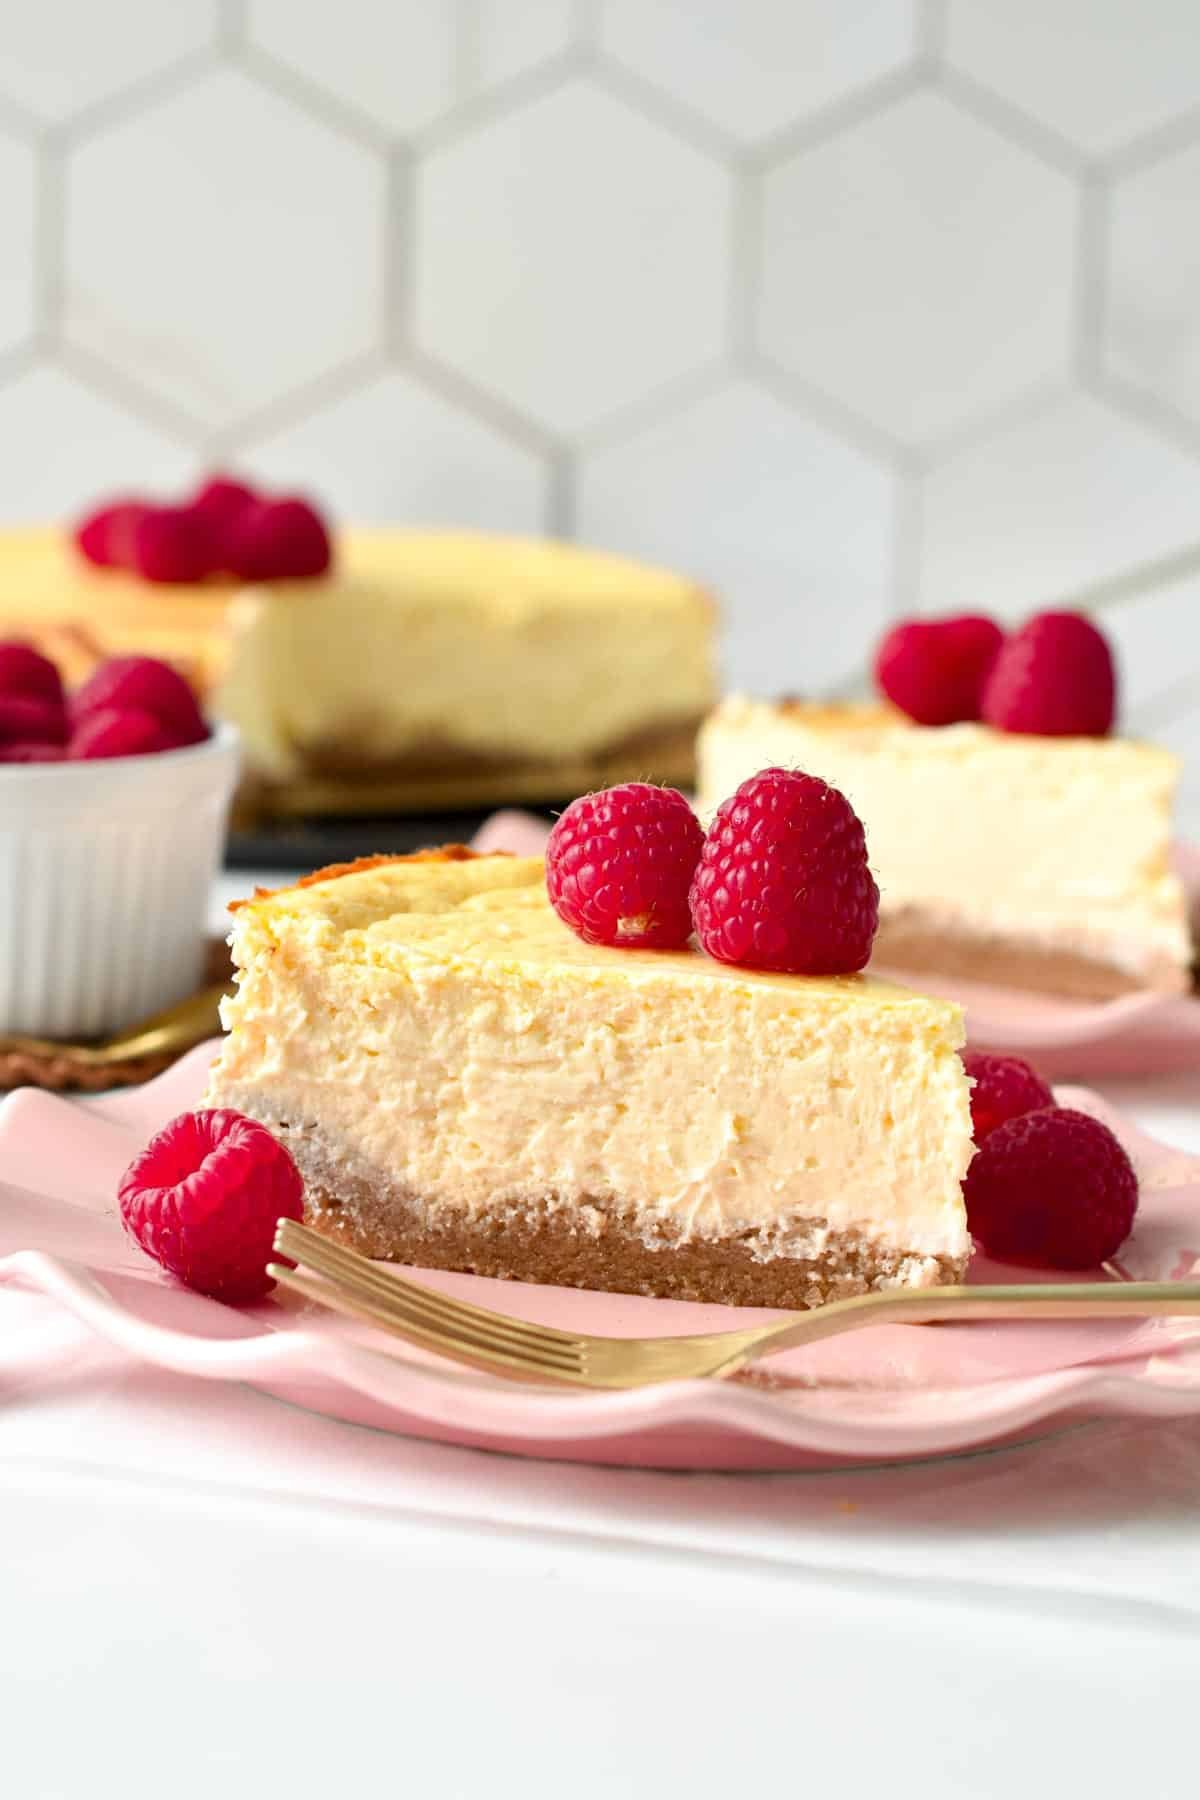 This healthy cheesecake recipe is the easiest healthy dessert for cheesecake lovers. Packed with 12 grams of proteins, no sugar, and gluten-free this dessert will make all your family and friends ask for more.